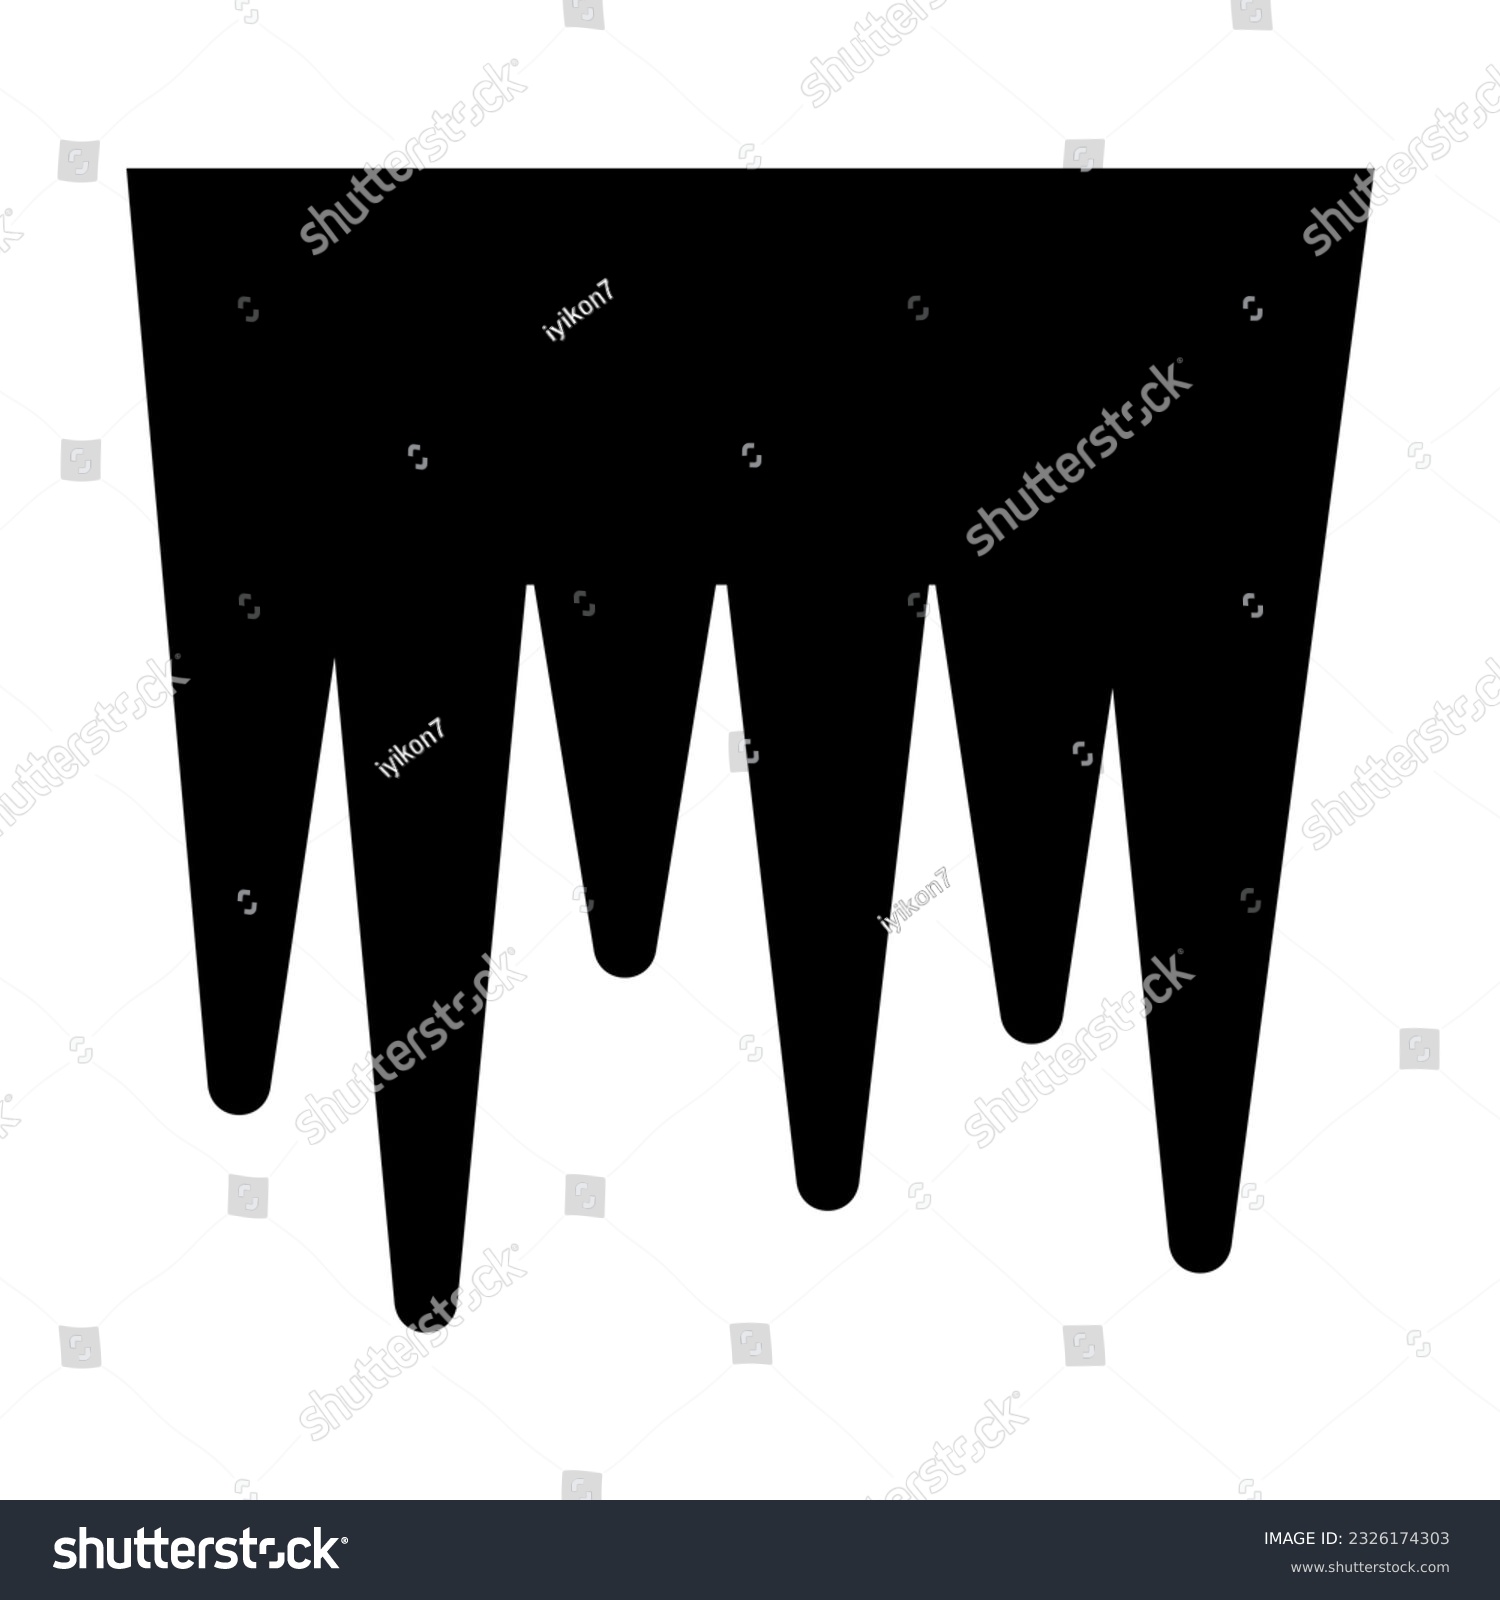 Icicles Vector Glyph Icon For Personal And Commercial Use.
 #2326174303